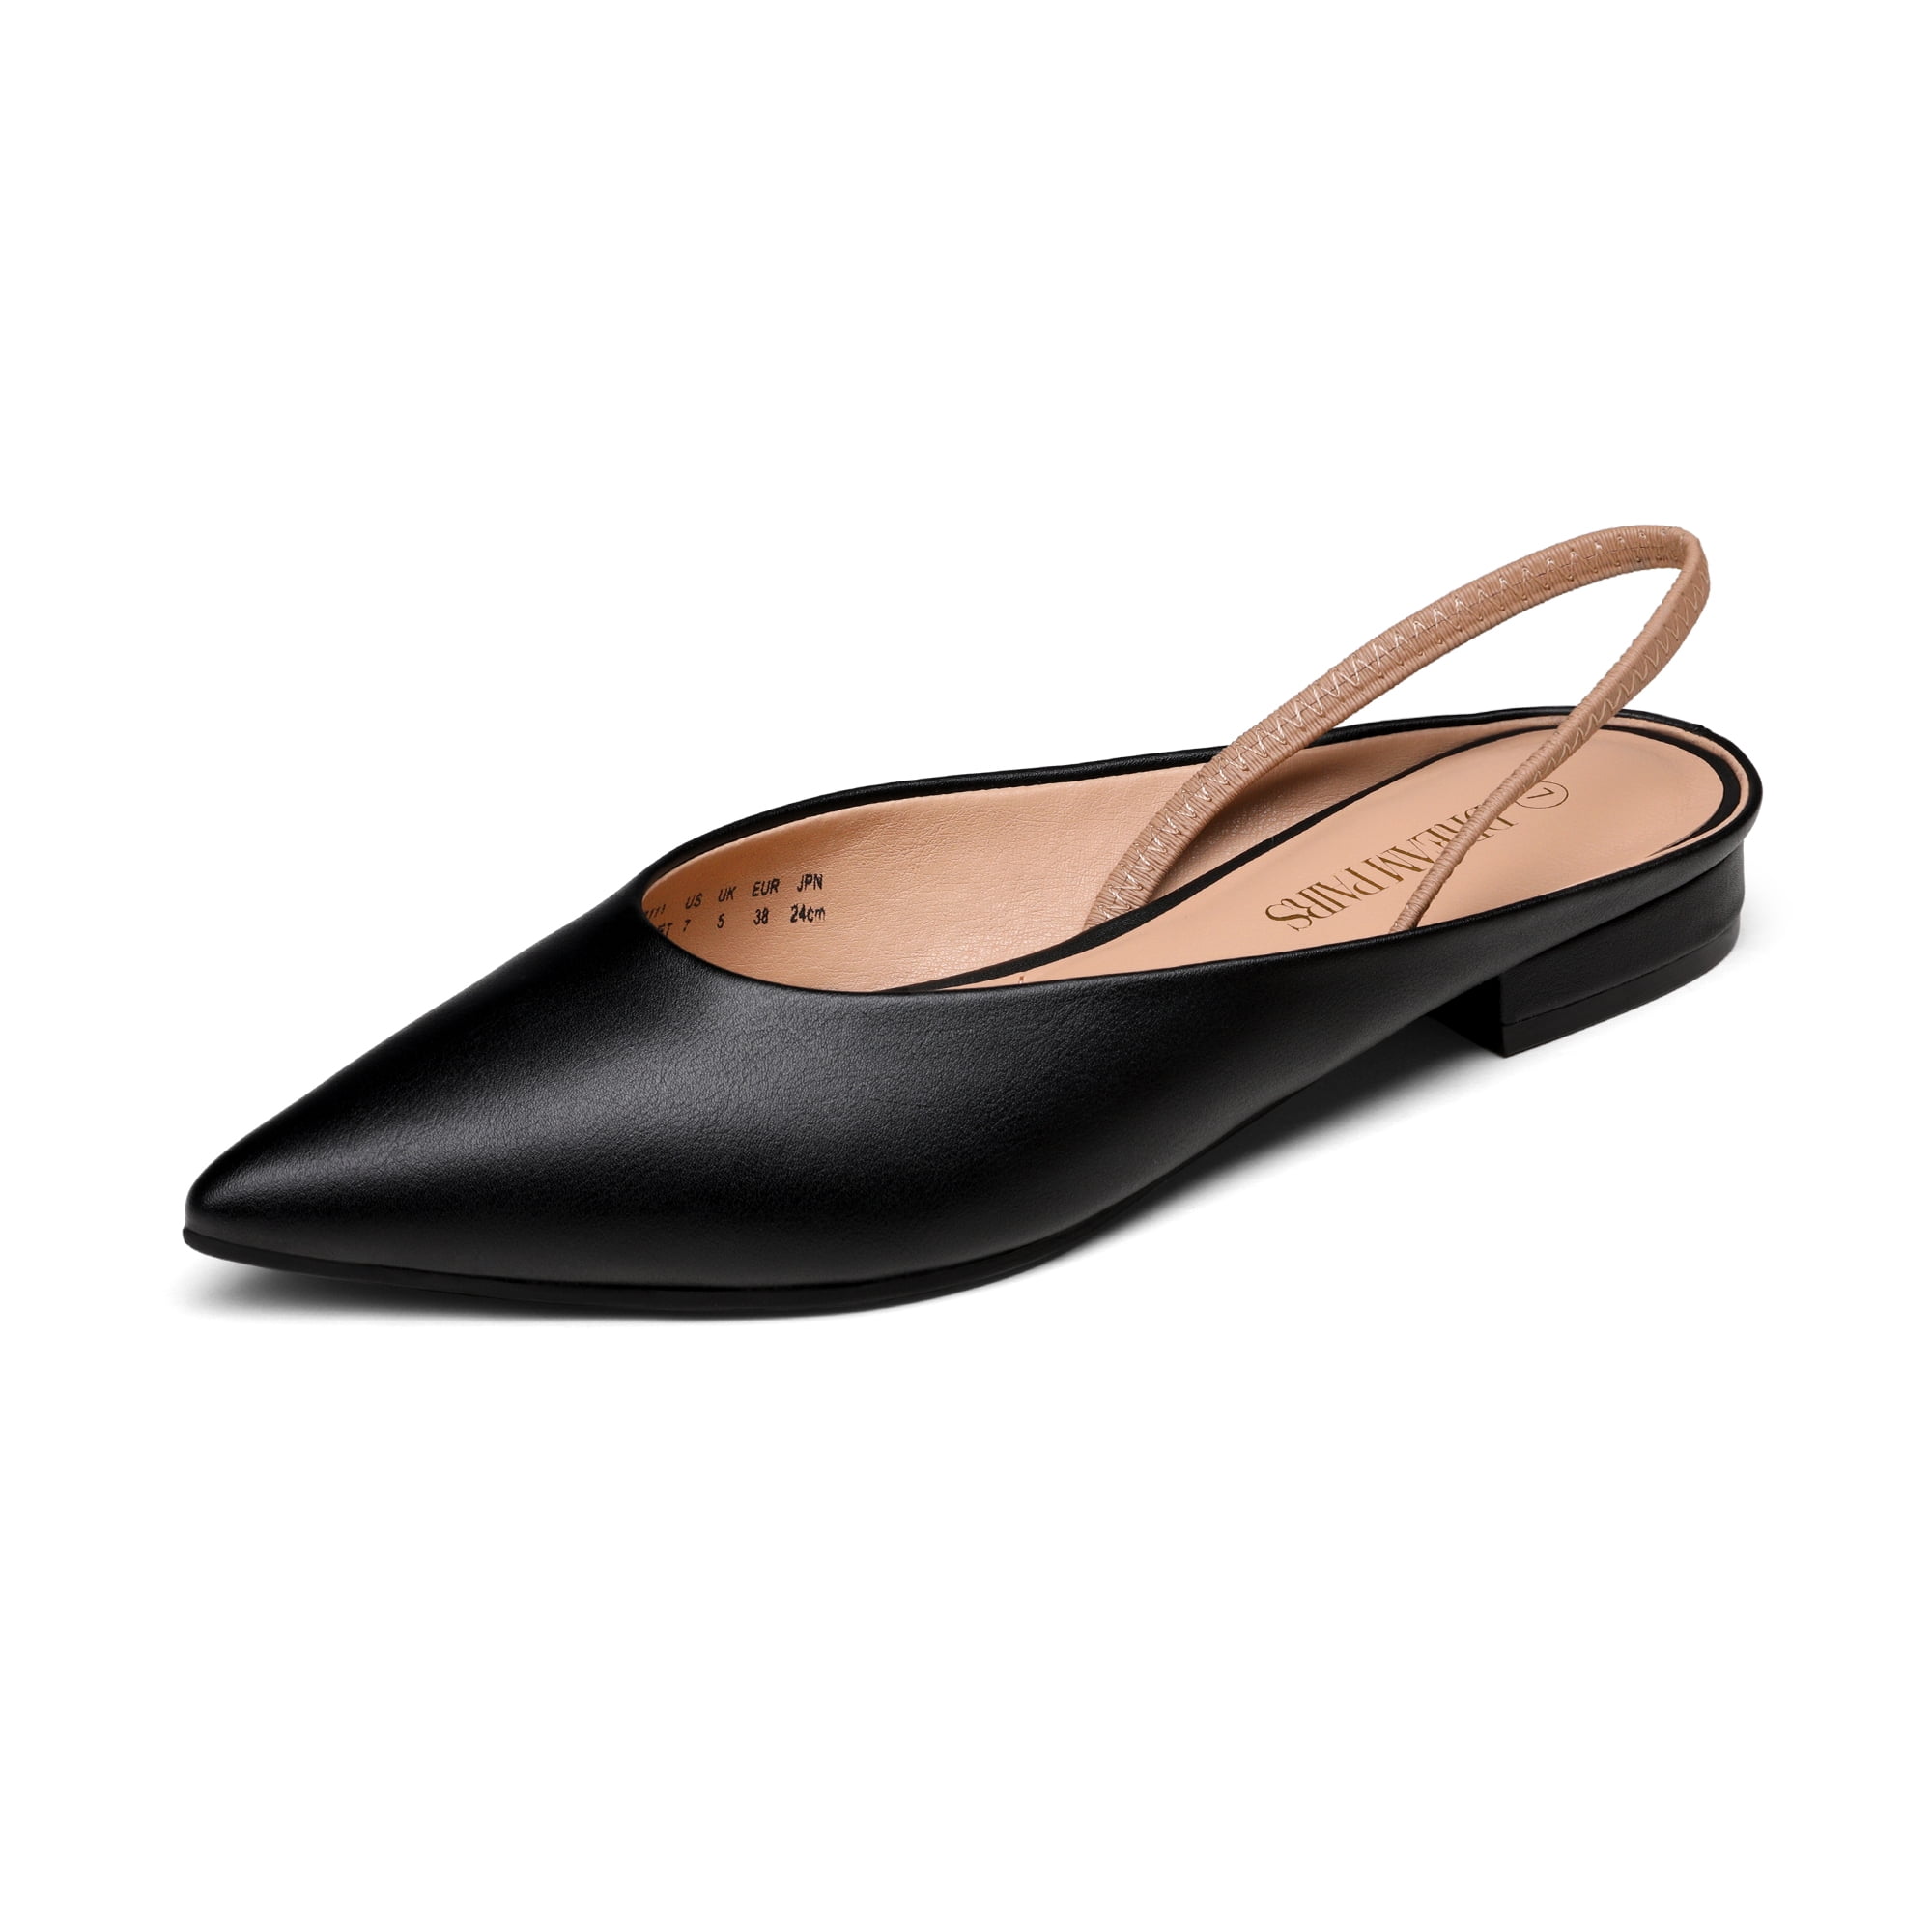 Podiatrists Helped Us Find Actually Supportive Ballet Flats